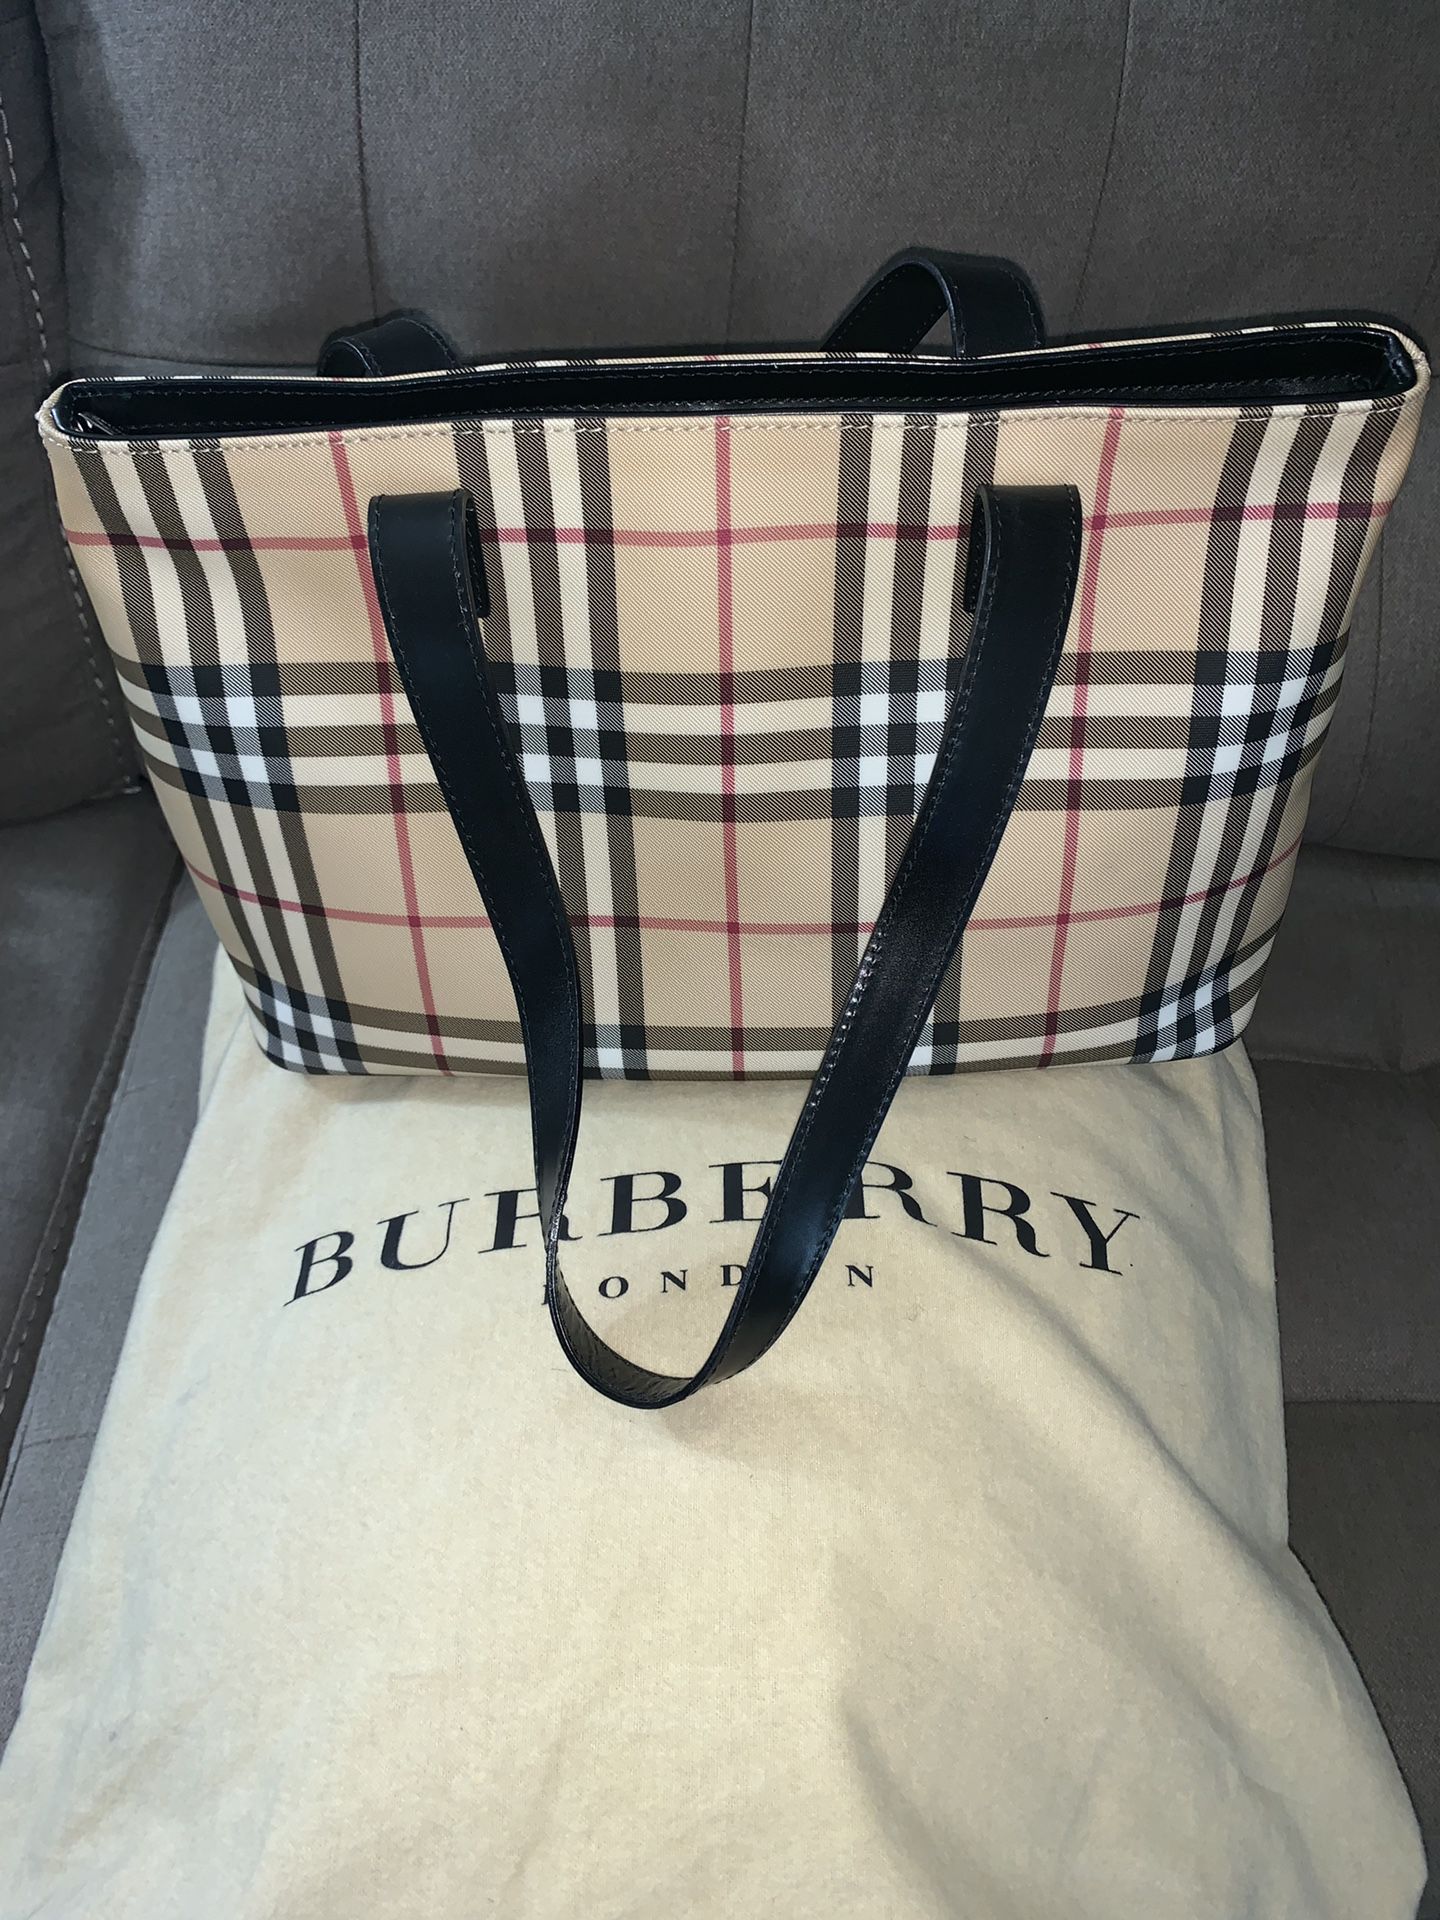 Burberry London Canvas Tote